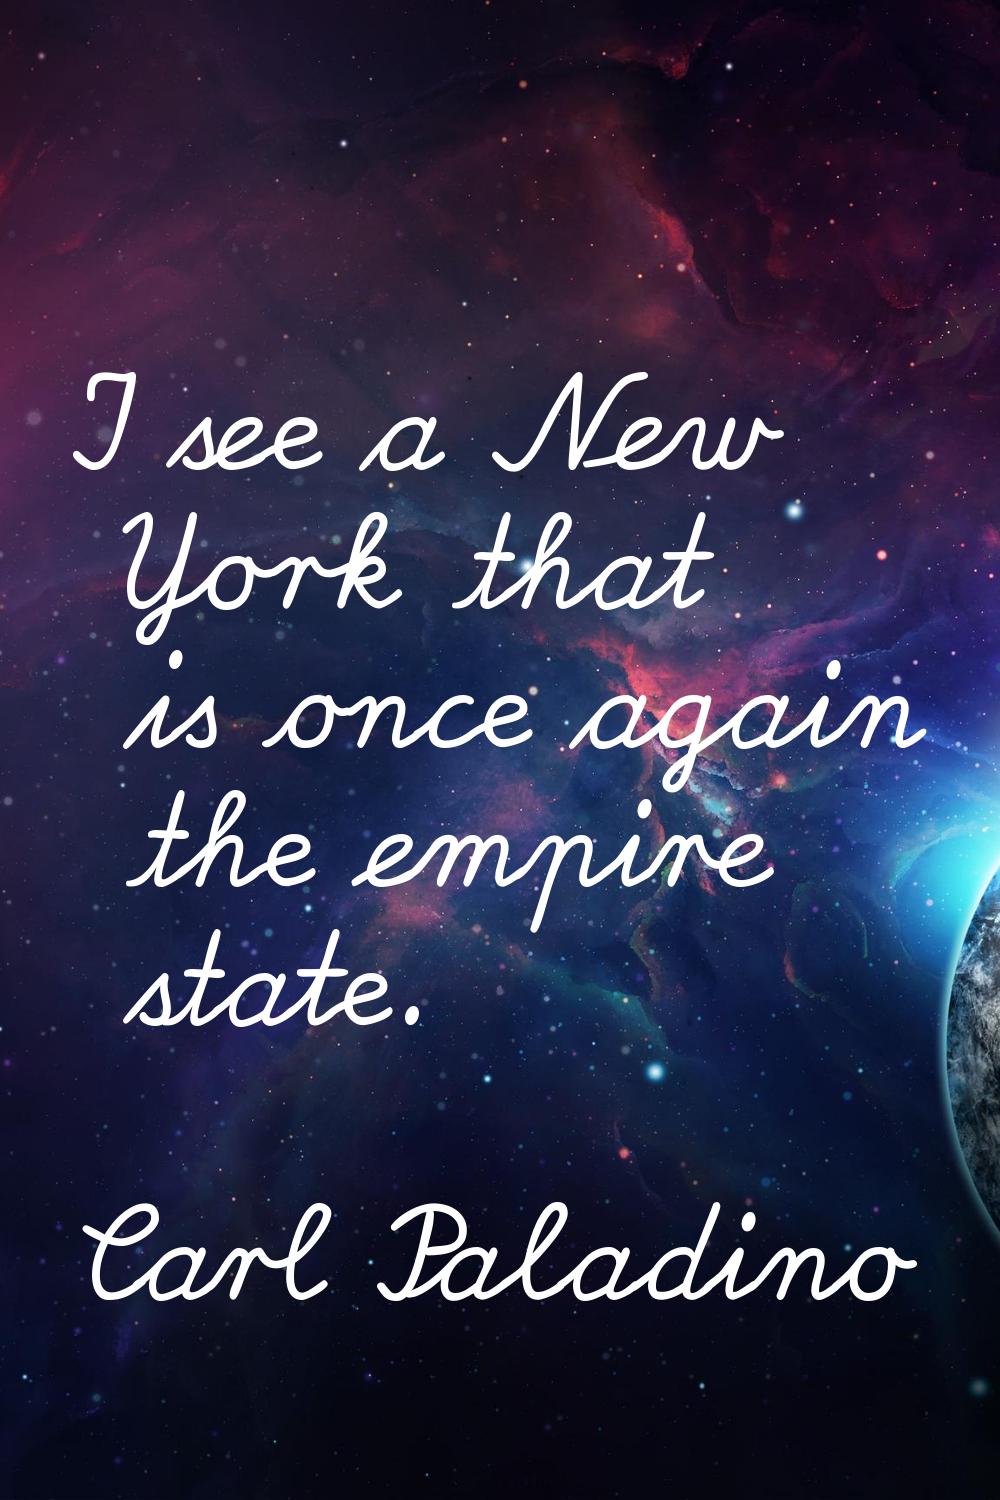 I see a New York that is once again the empire state.